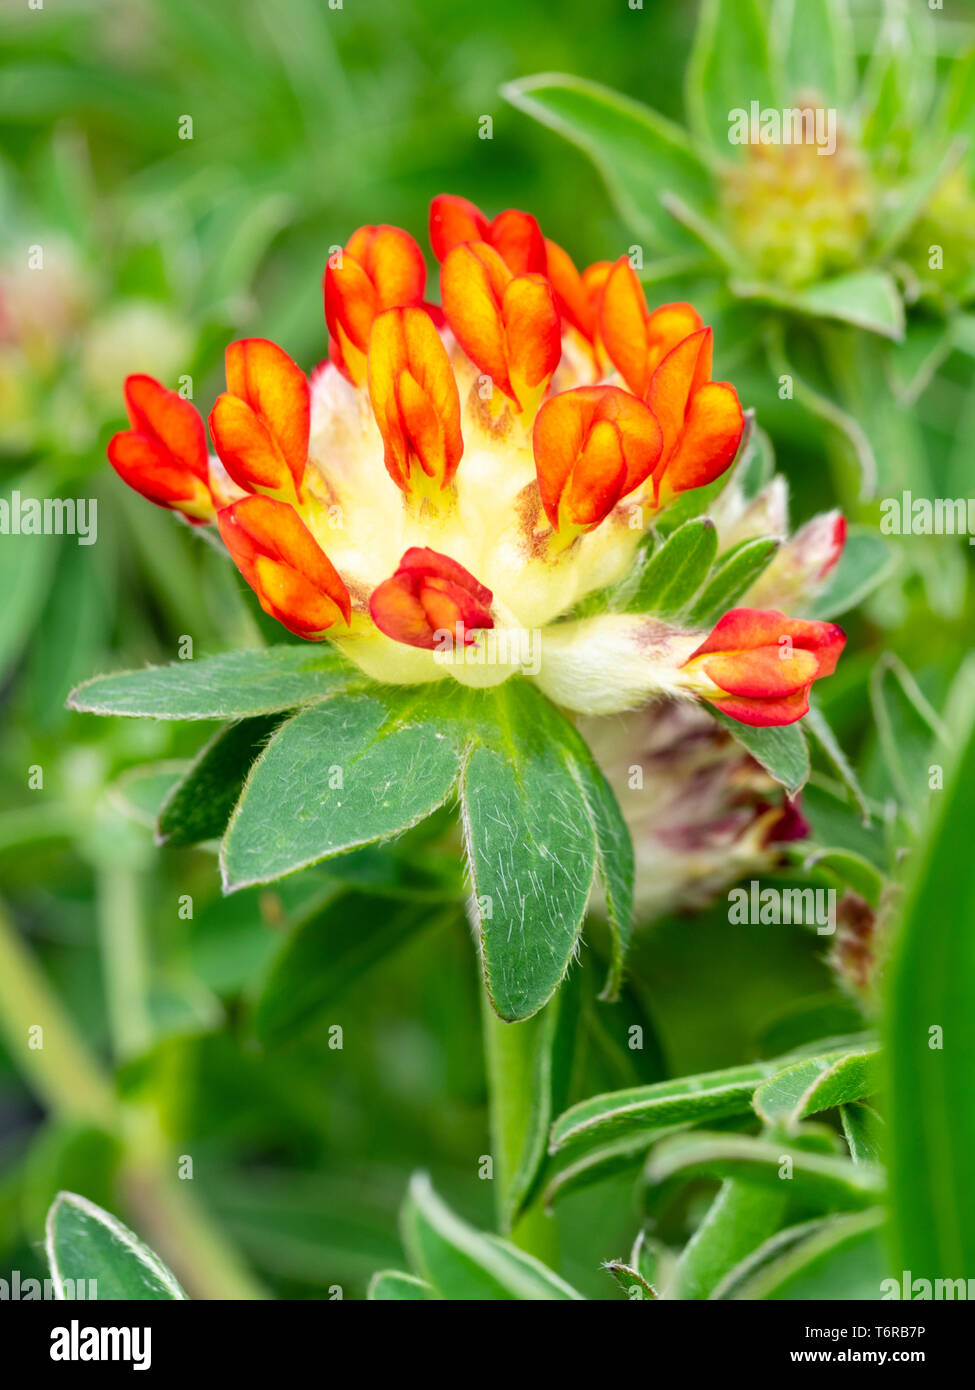 Spring flowers of the downy leaved perennial alpine red kidney vetch, Anthyllis vulneraria var. coccinea Stock Photo